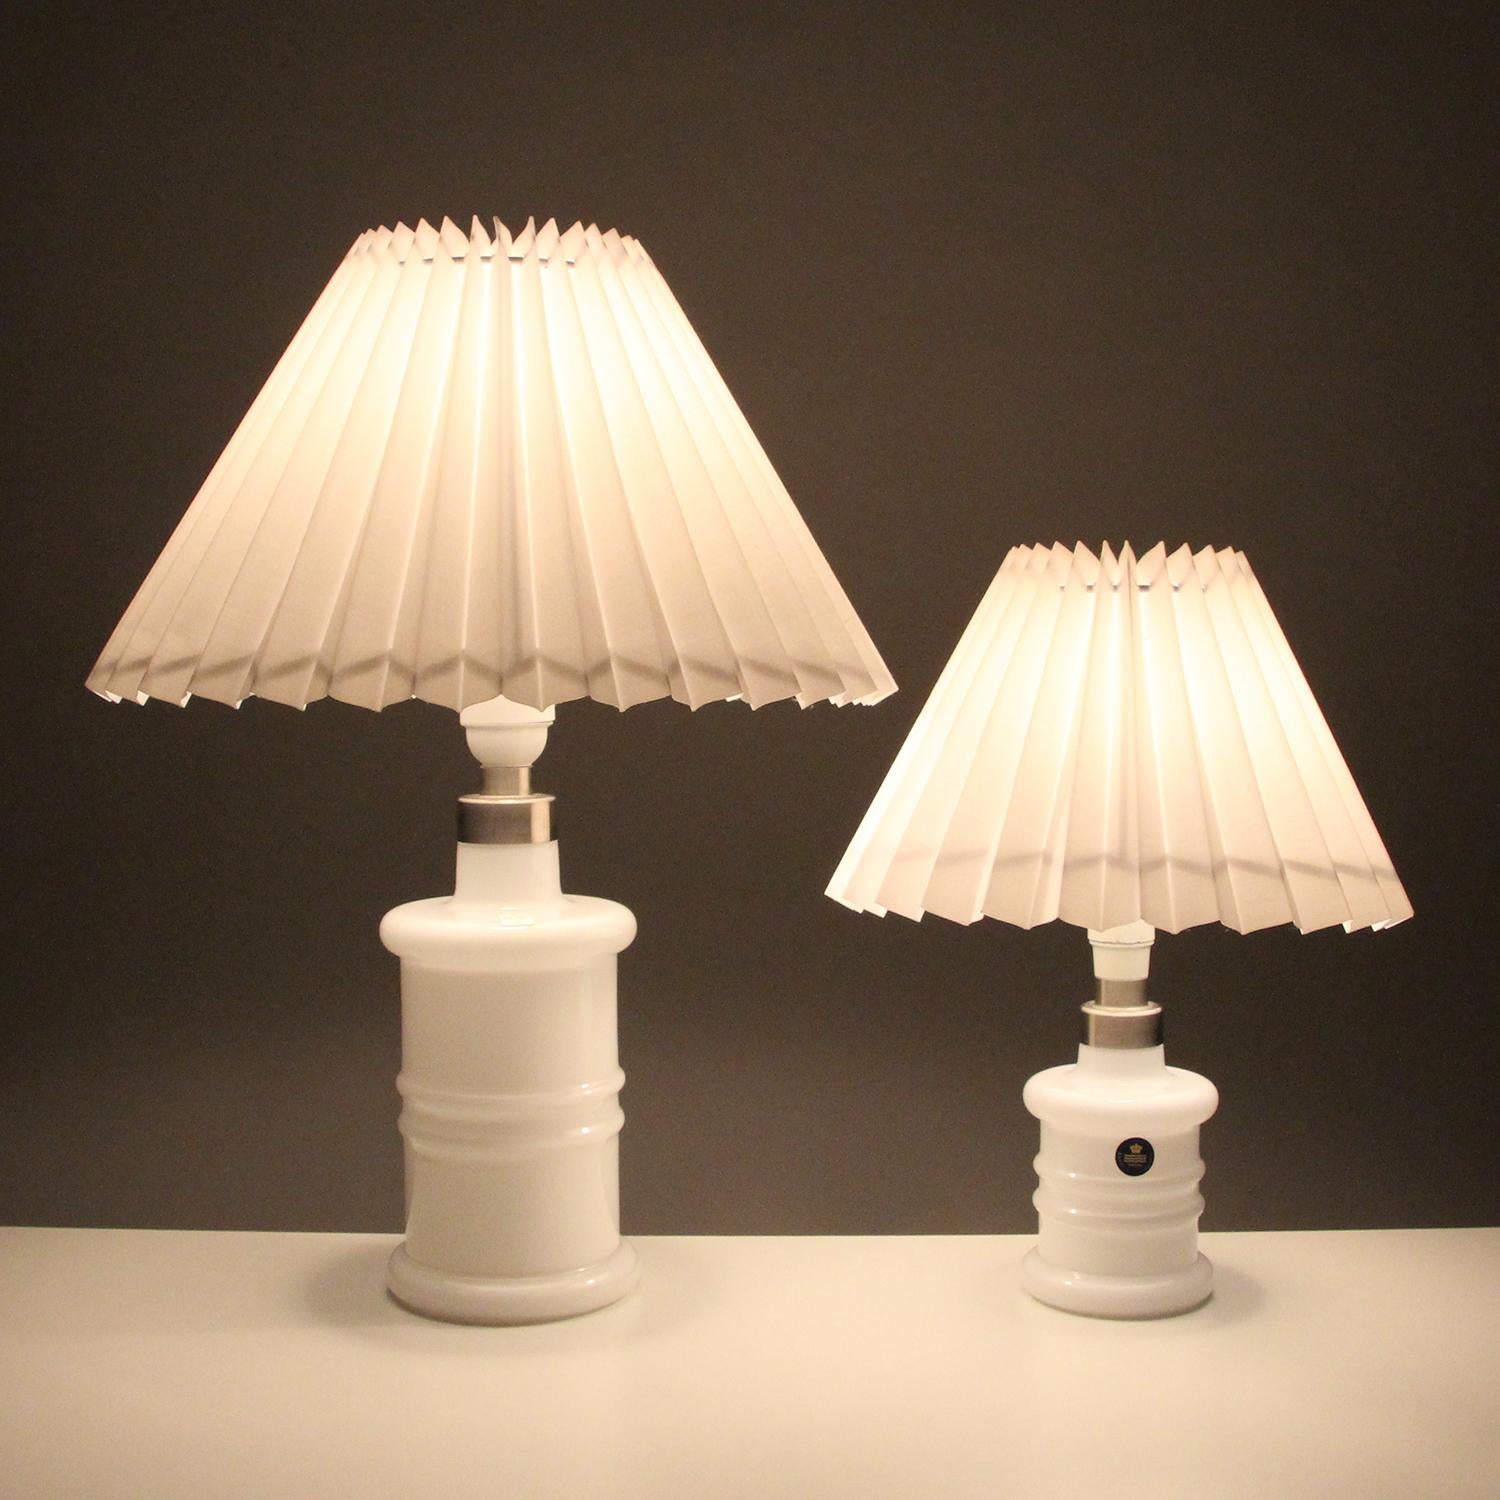 Apoteker table lamps (set) by Sidse Werner for Holmegaard in 1981 - elegant Danish modern blown glass table lights with new pleated shades included, both in excellent vintage condition.

This lot features two table lamps - one larger than the